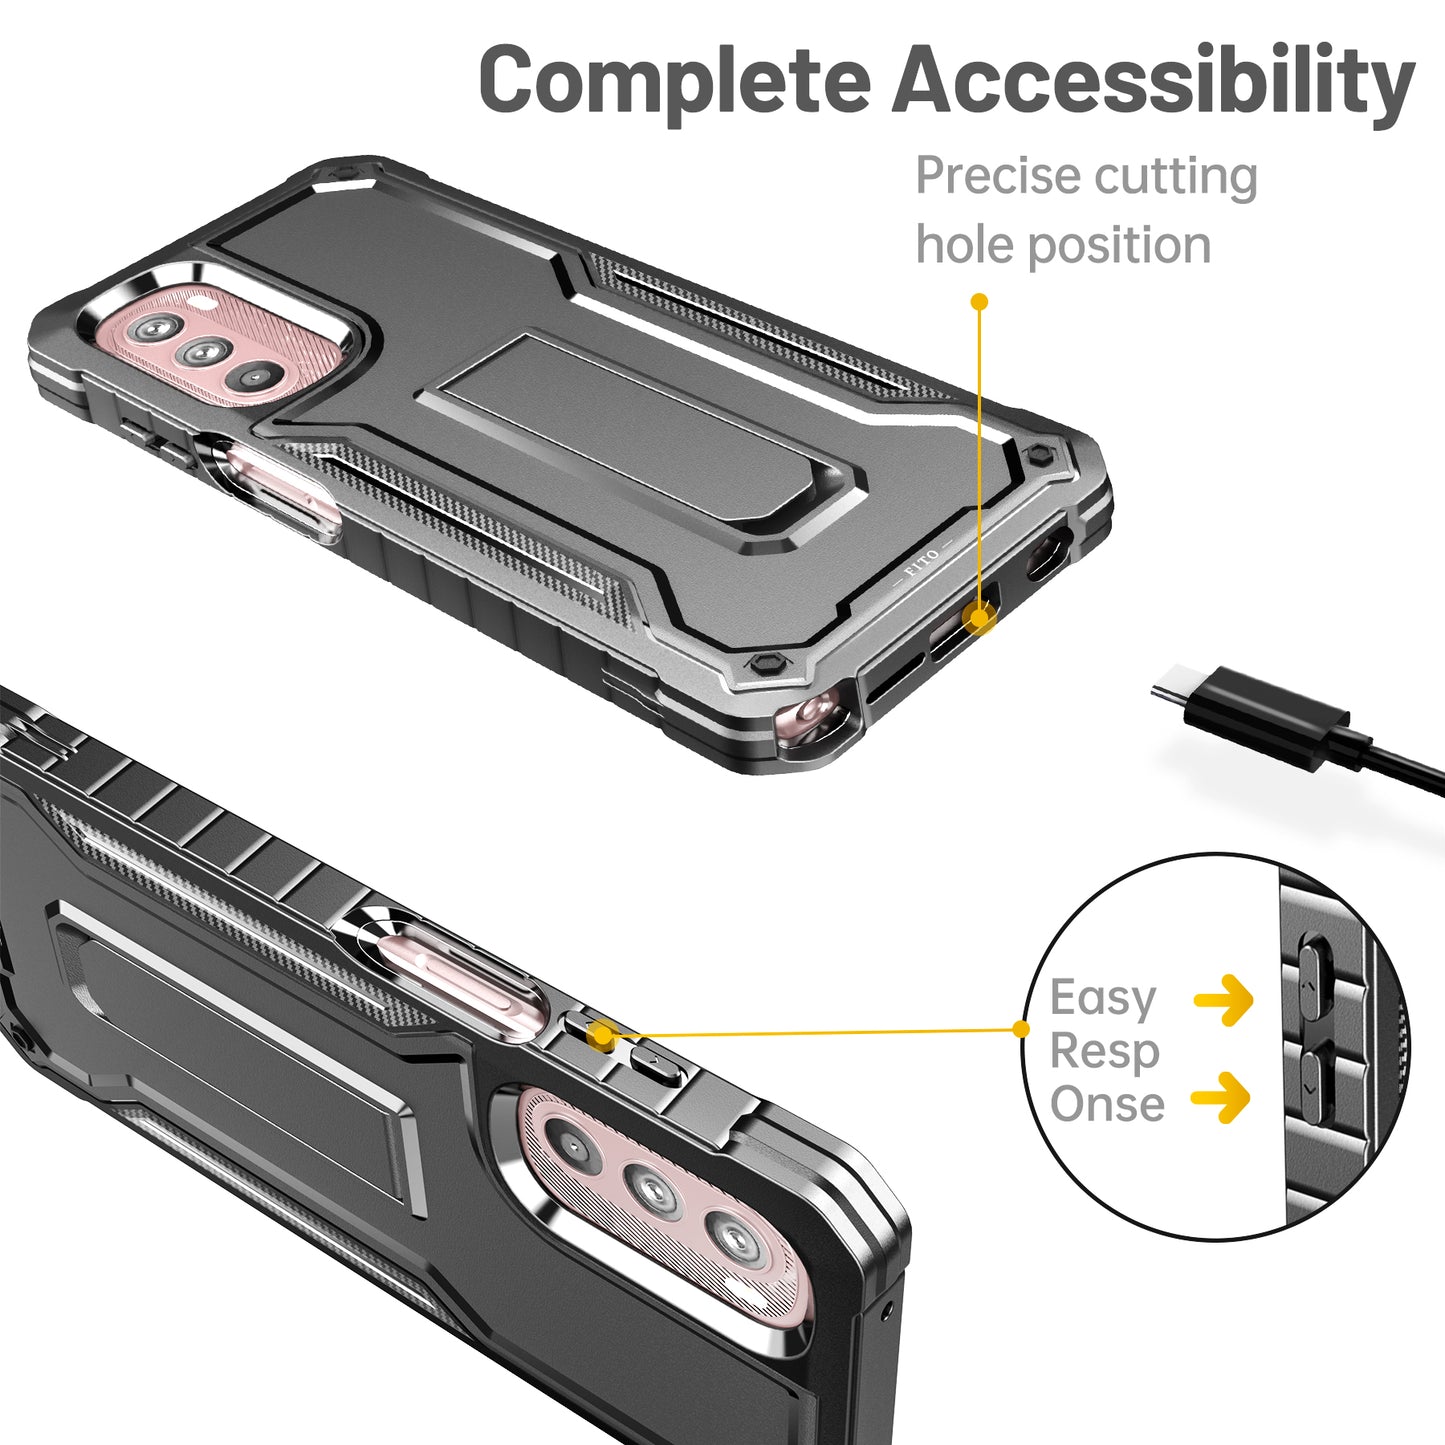 FITO for Moto G Stylus 2022 Case, Dual Layer Shockproof Heavy Duty Case for Moto G Stylus 2022 Phone with Screen Protector, Built-in Kickstand